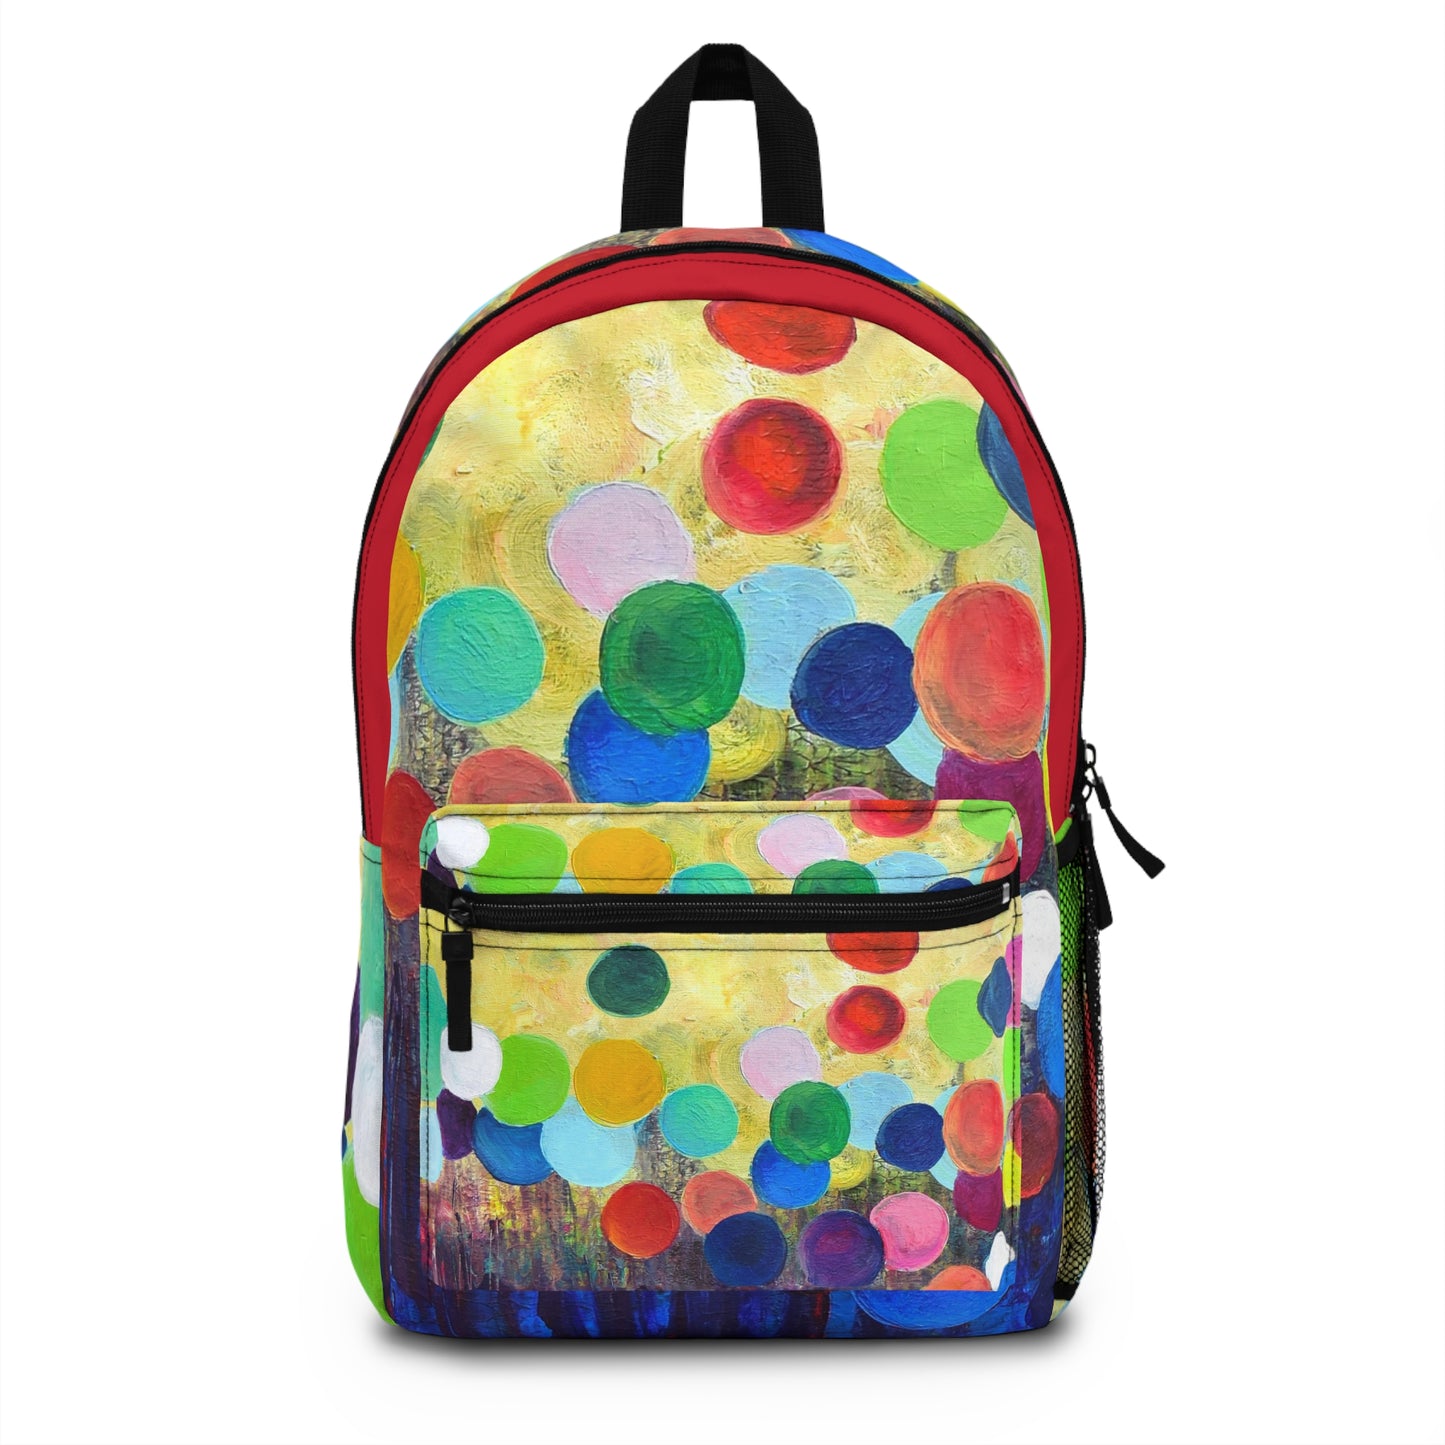 Backpack, with polkadots